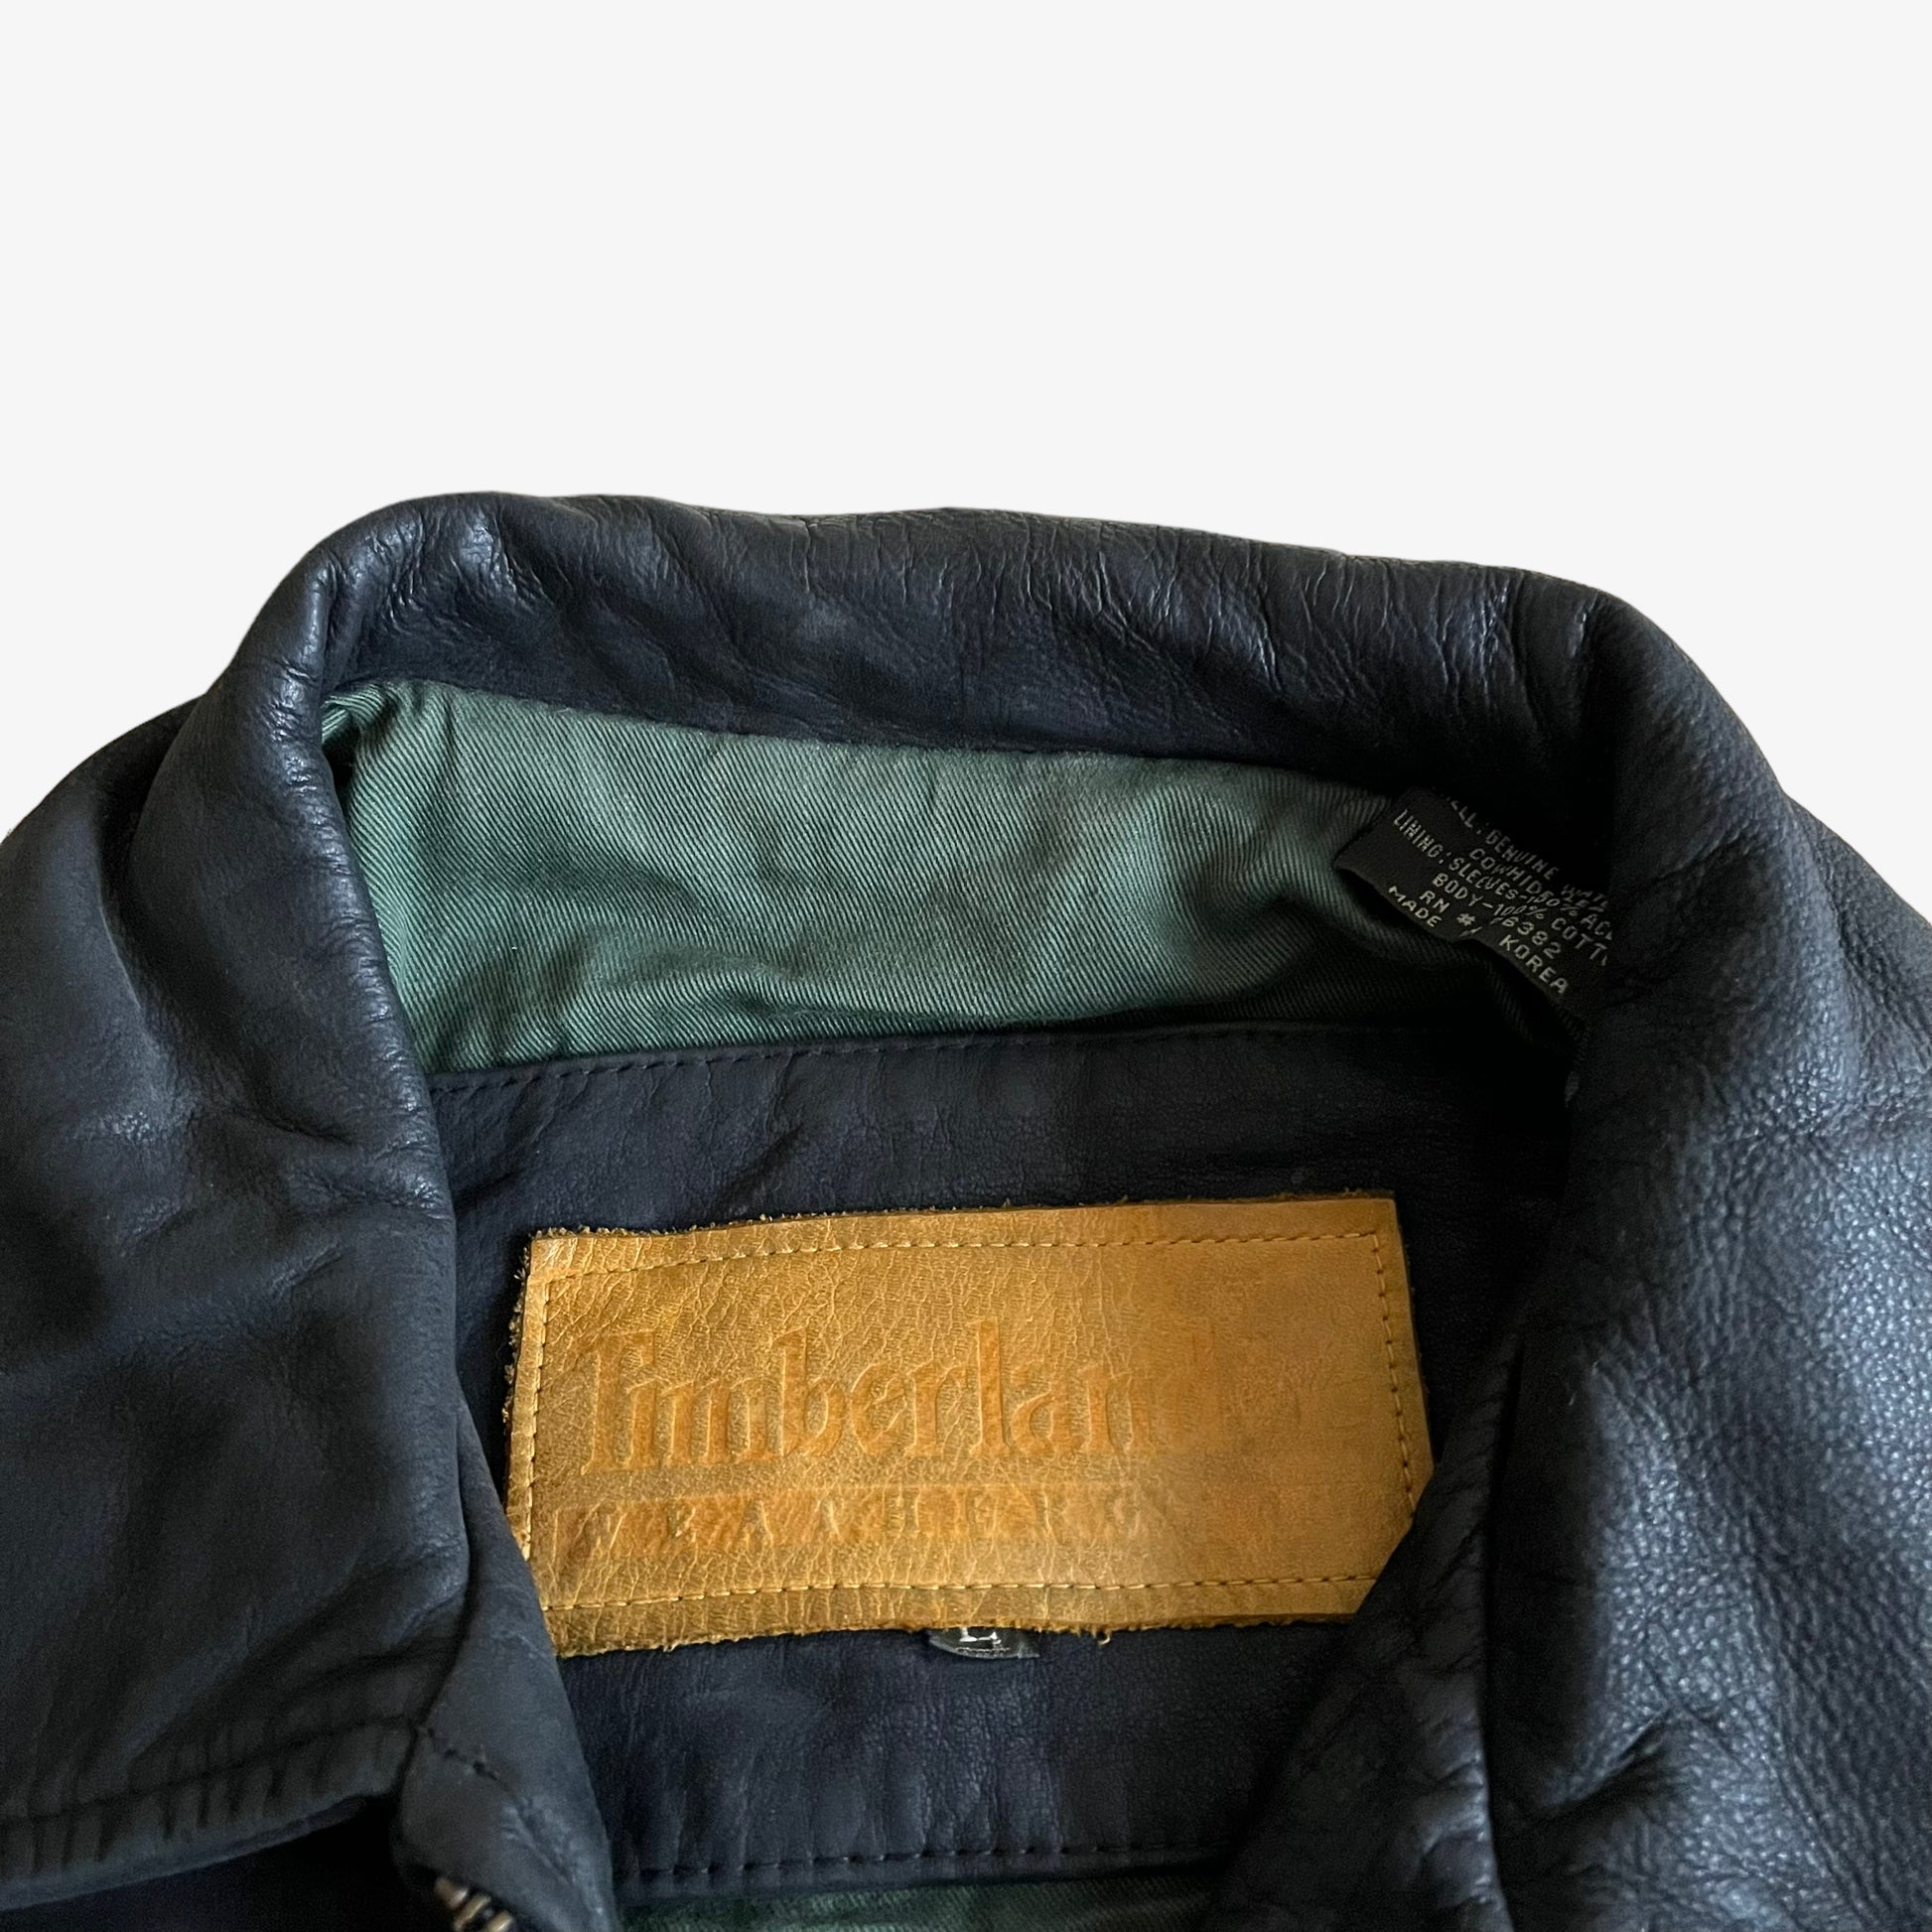 Vintage 90s Timberland Black Leather Driving Jacket Label - Casspios Dream